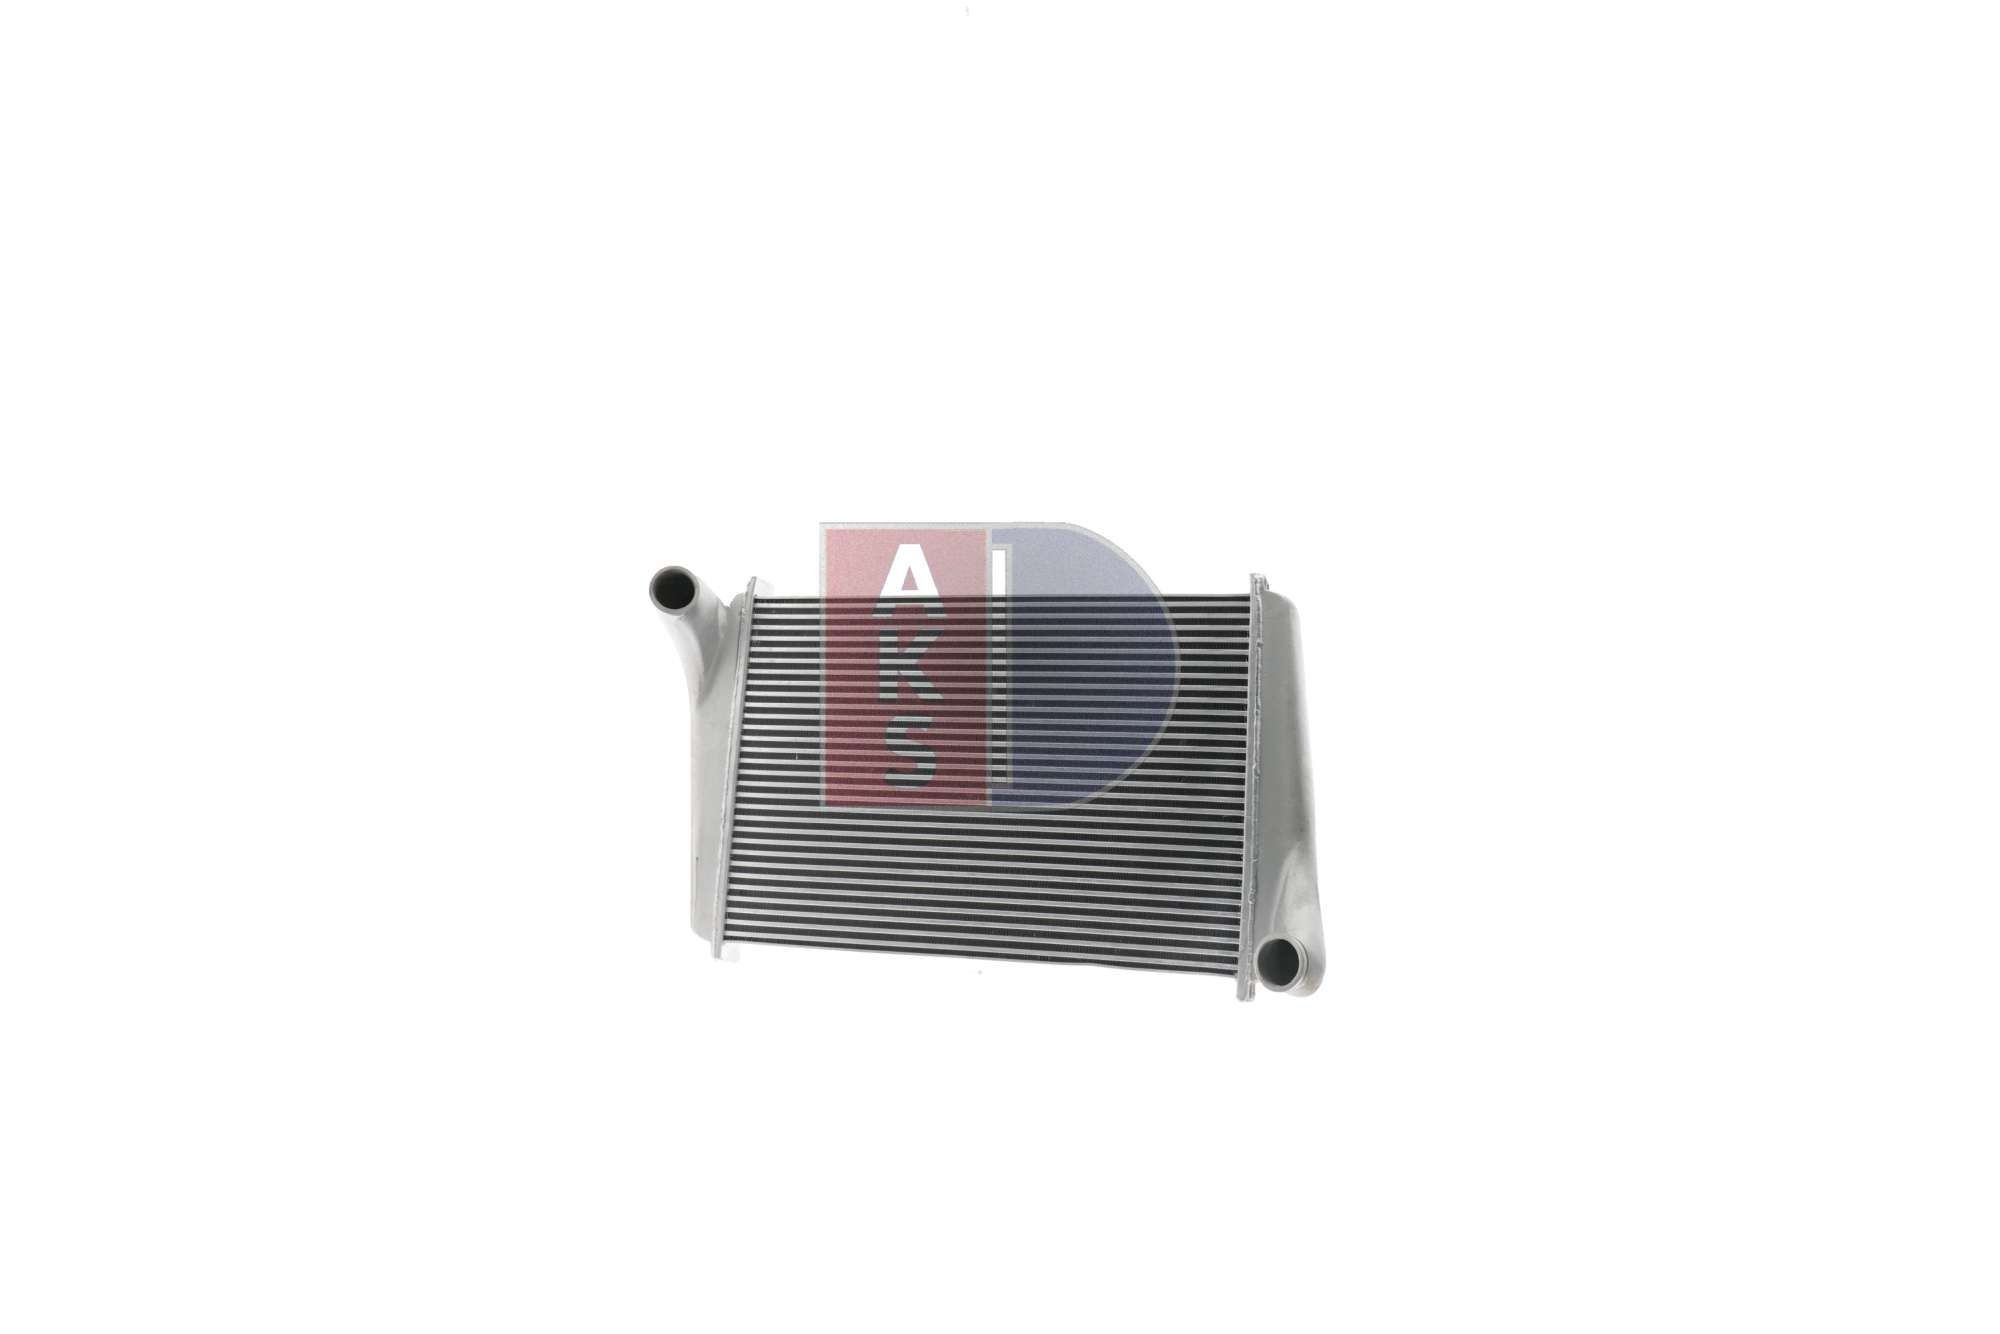 AKS DASIS 048132N Radiator cooling fan for vehicles without air conditioning, Ø: 370, 360 mm, 12V, 100W